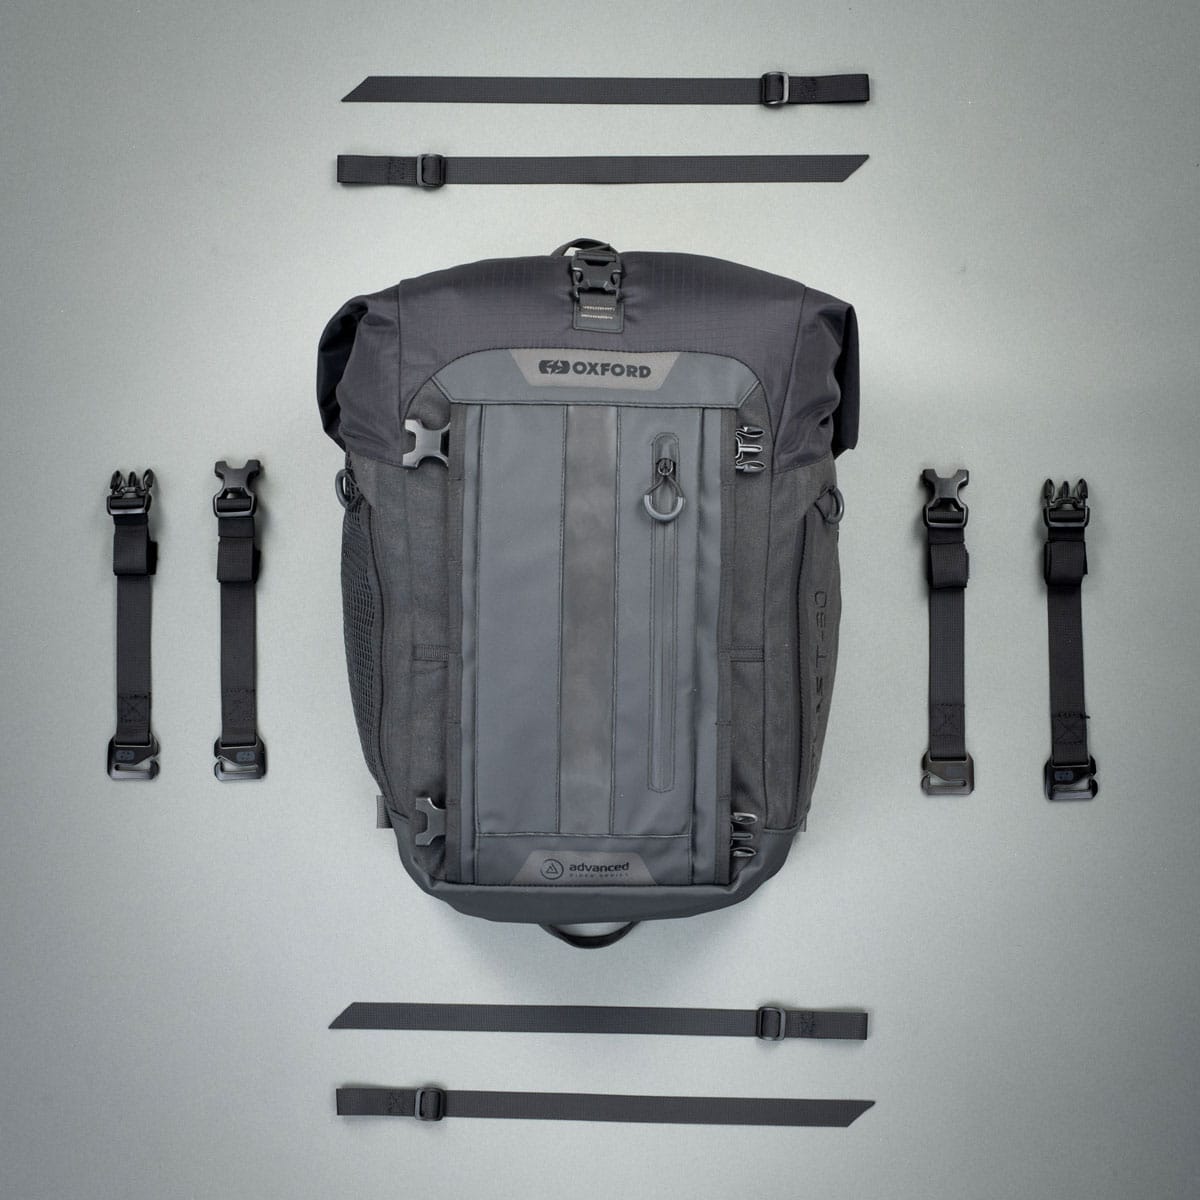 Get ready to explore without limits with the Oxford Atlas T-20 Advanced Tourpack. It's a tailpack designed for ultimate adaptability and durability.